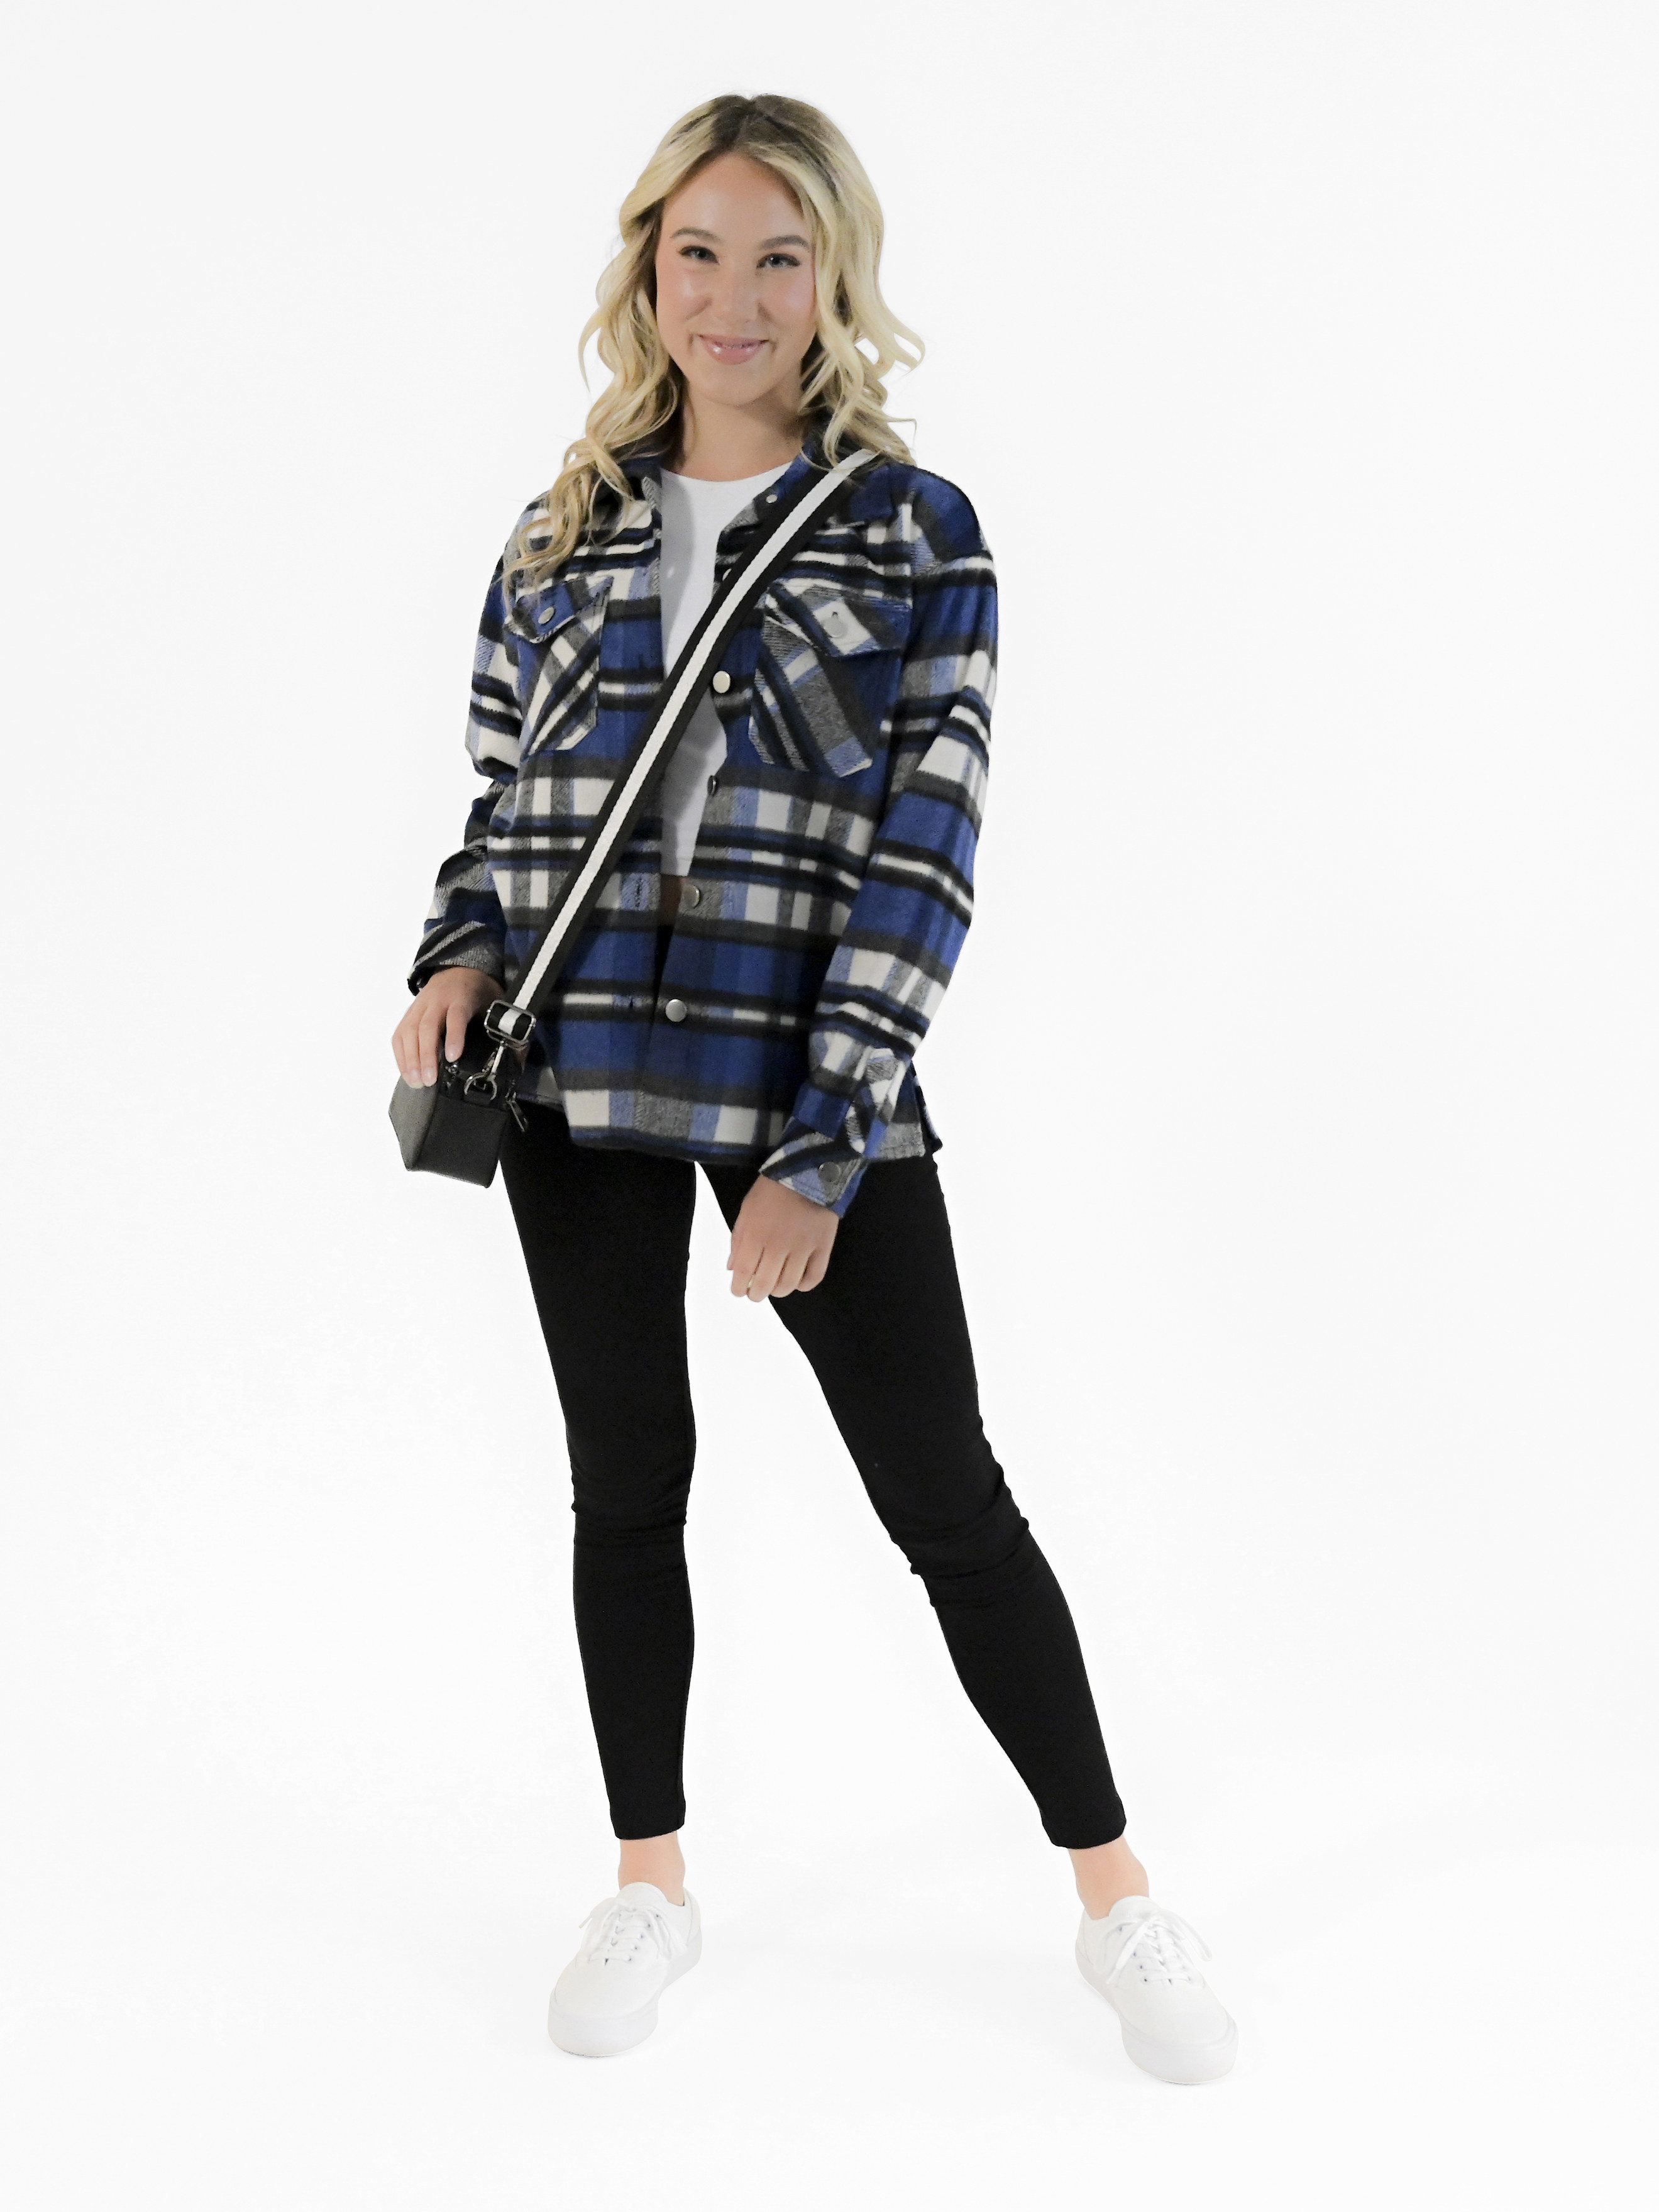 model wearing the blue and black and white plaid shacket